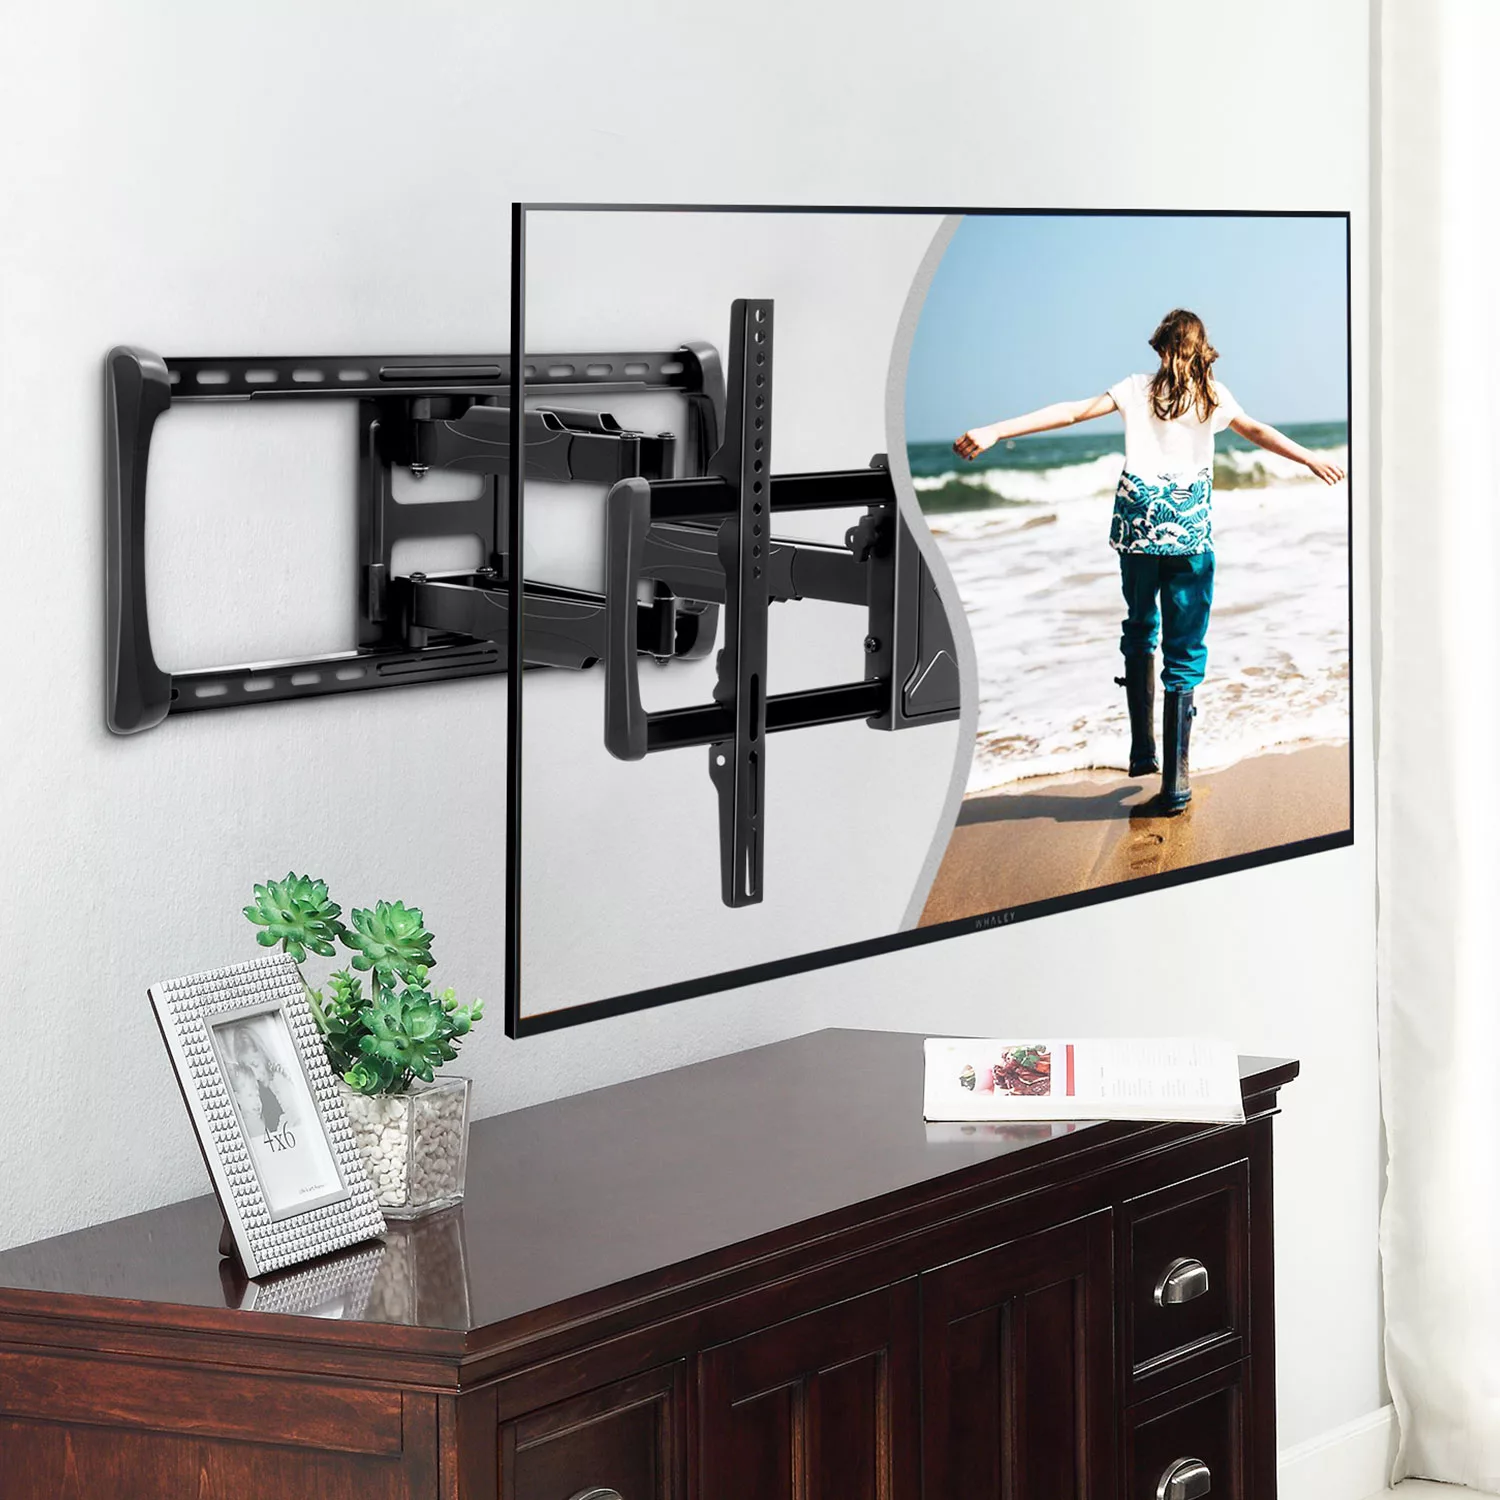 Member's Mark Full Motion Extended TV Wall Mount with Articulating Dual Swivel A